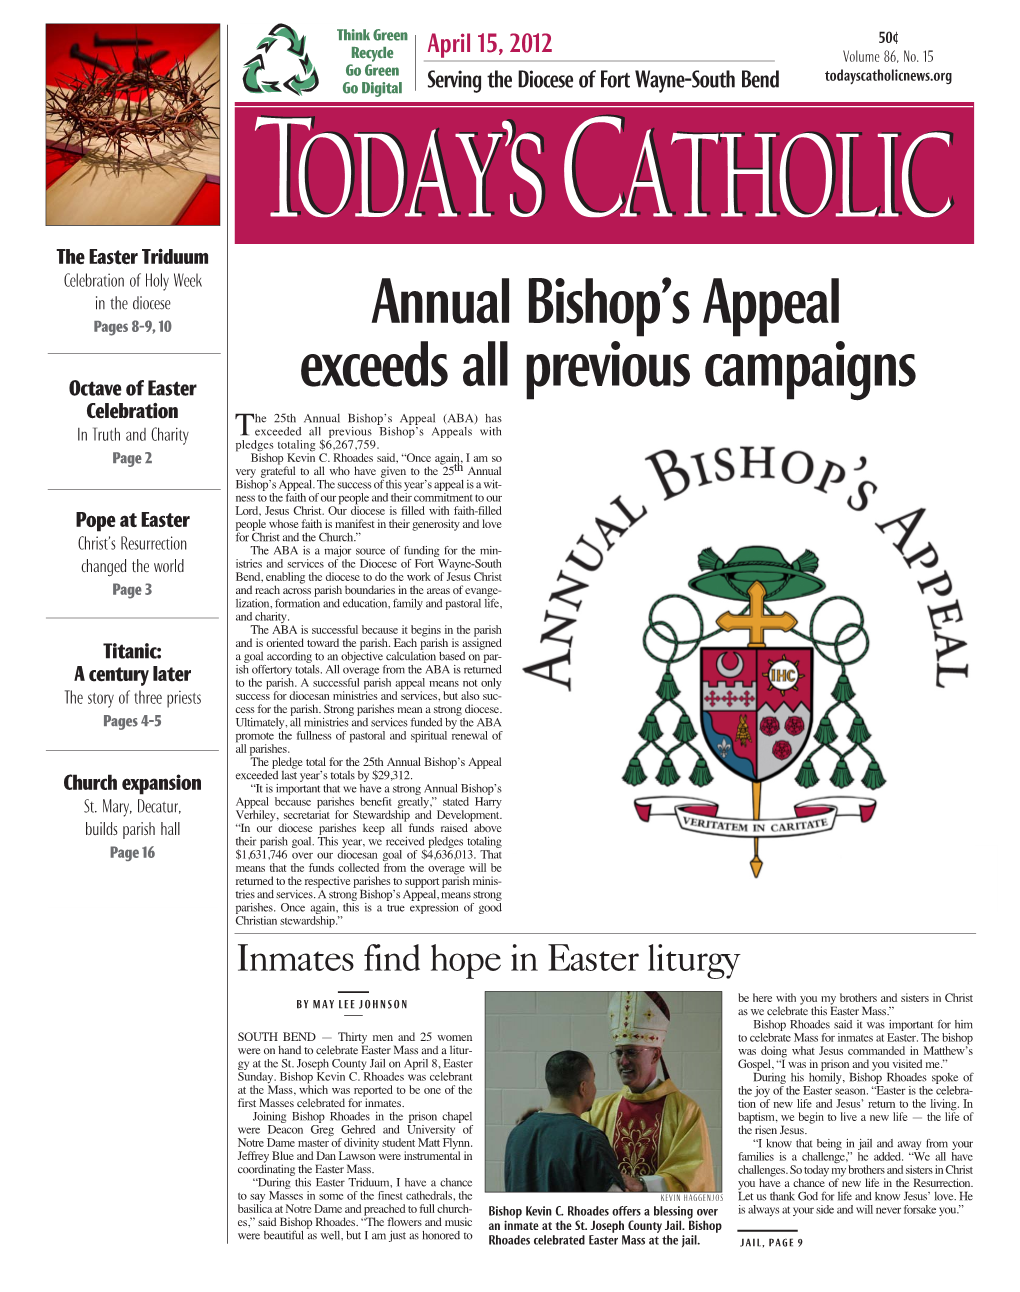 Annual Bishop's Appeal Exceeds All Previous Campaigns